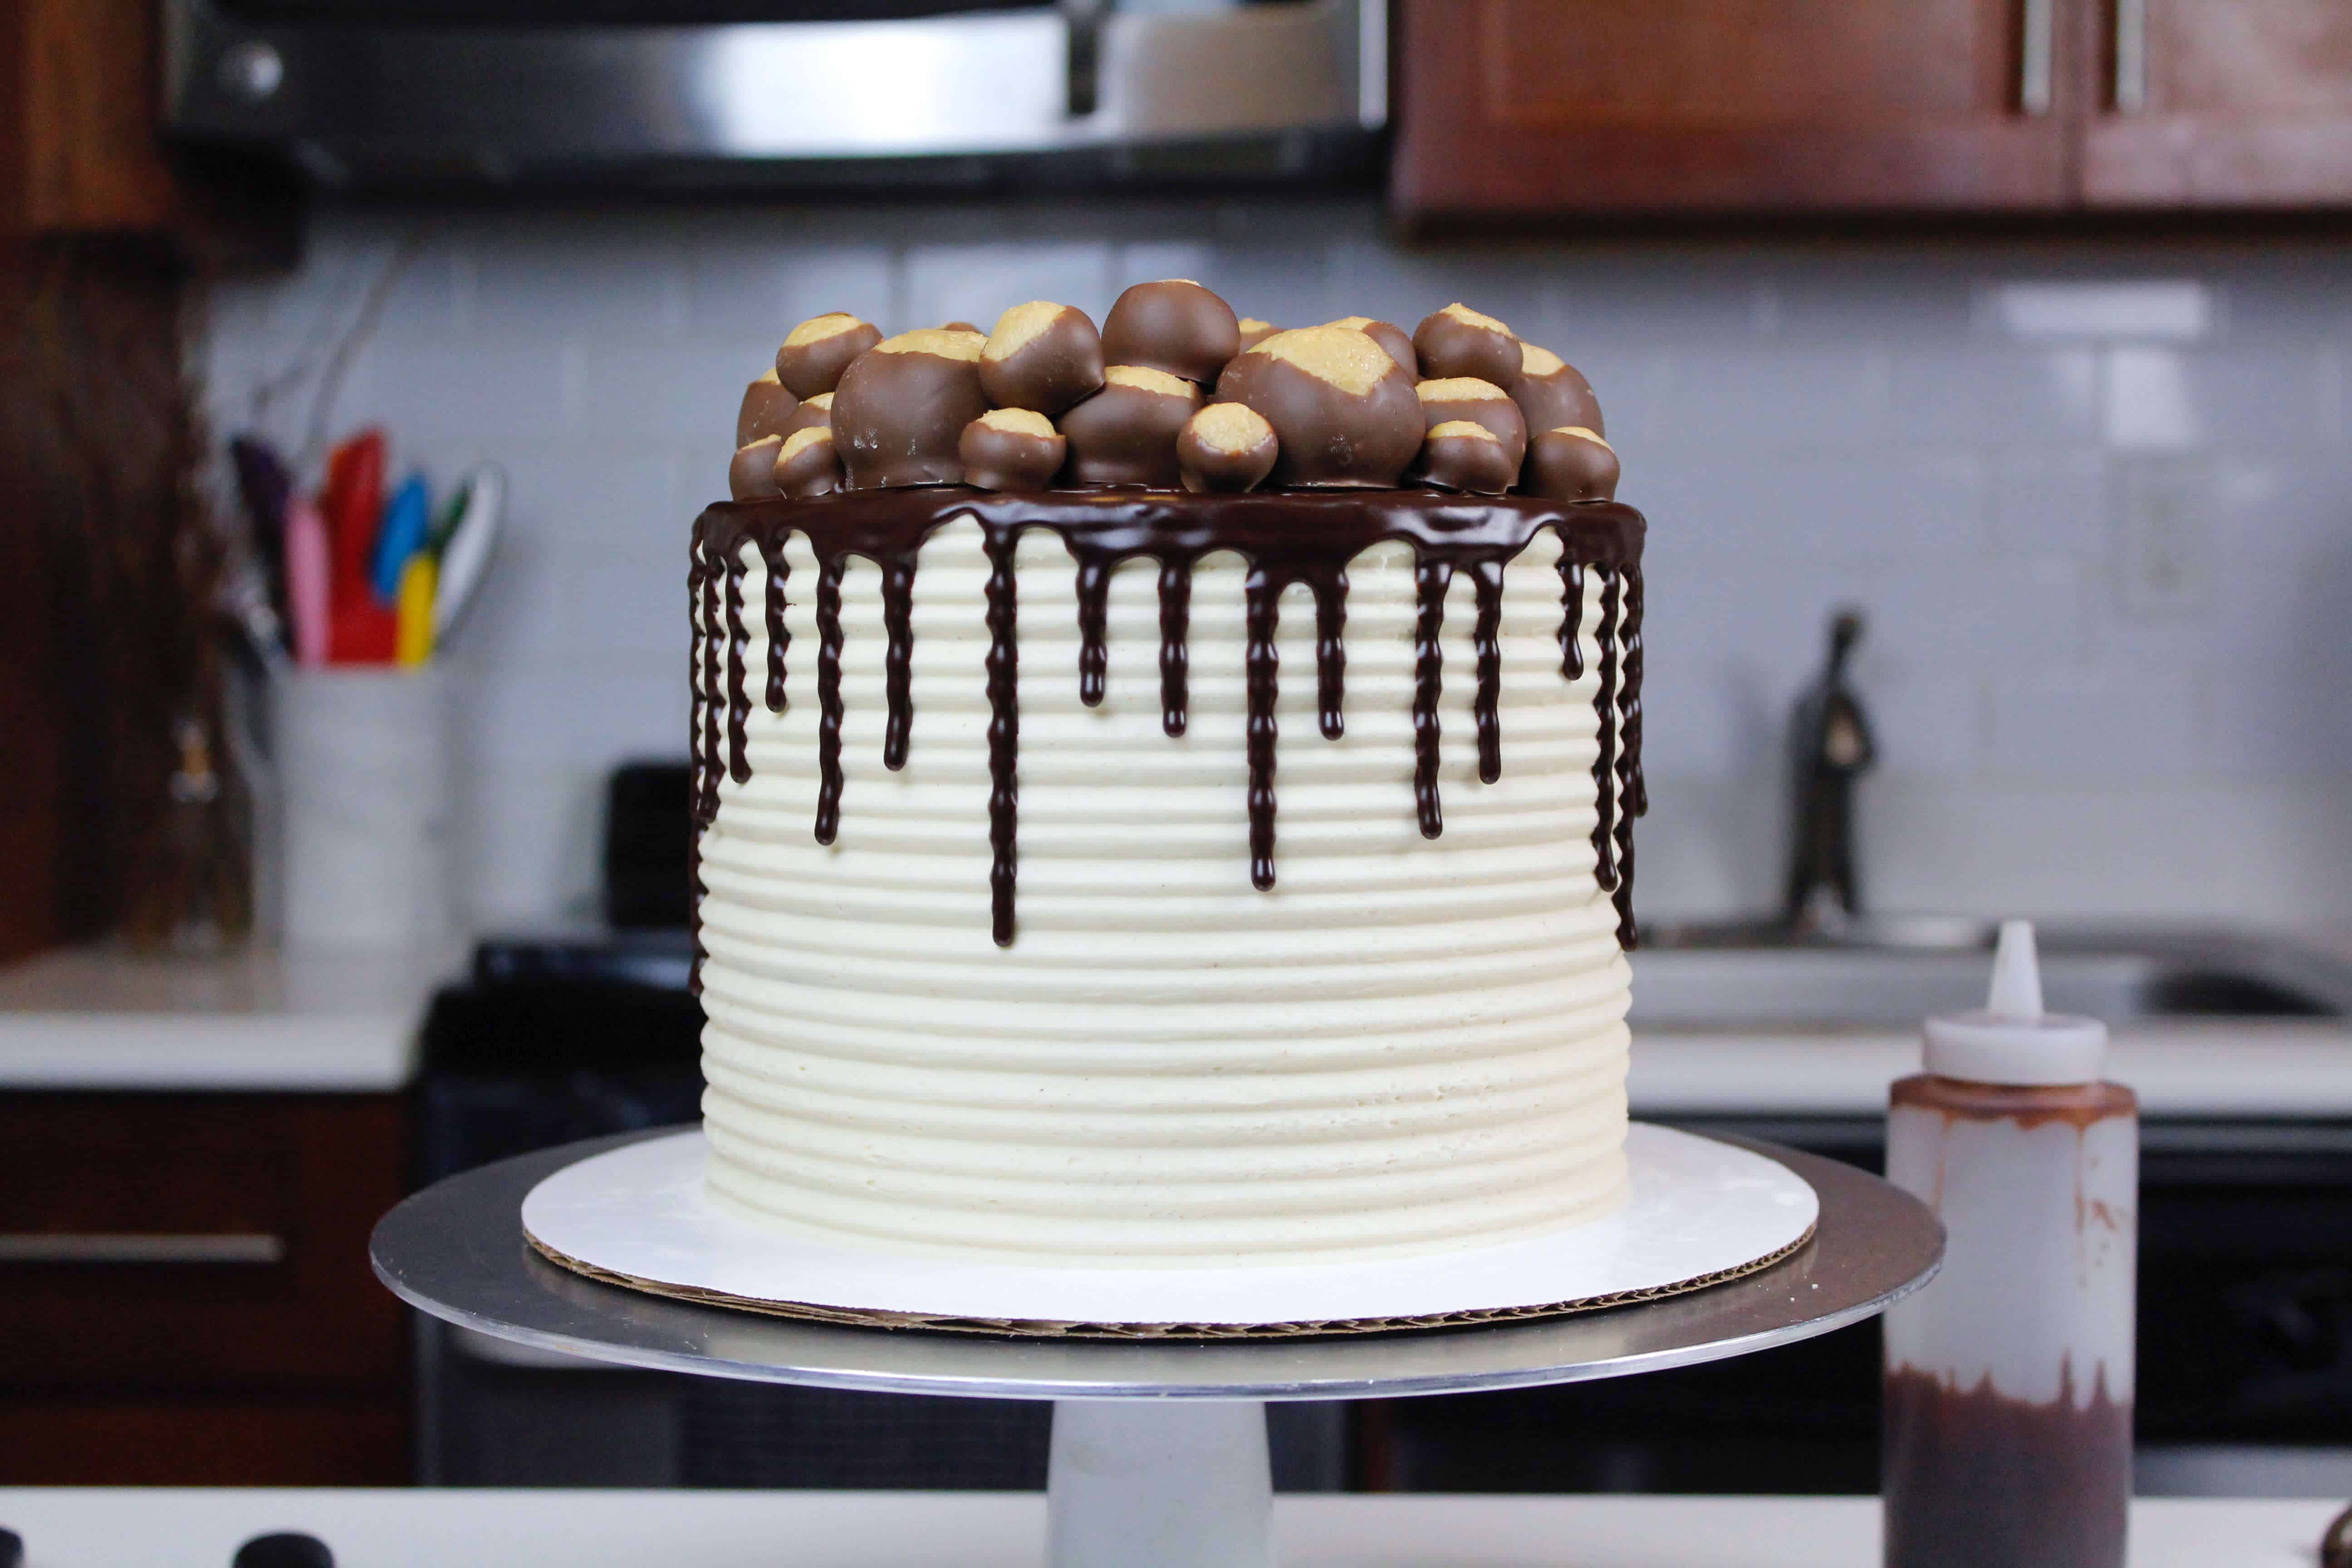 image of a buckeye cake recipe made with chocolate cake layers and decorated with buckeye balls